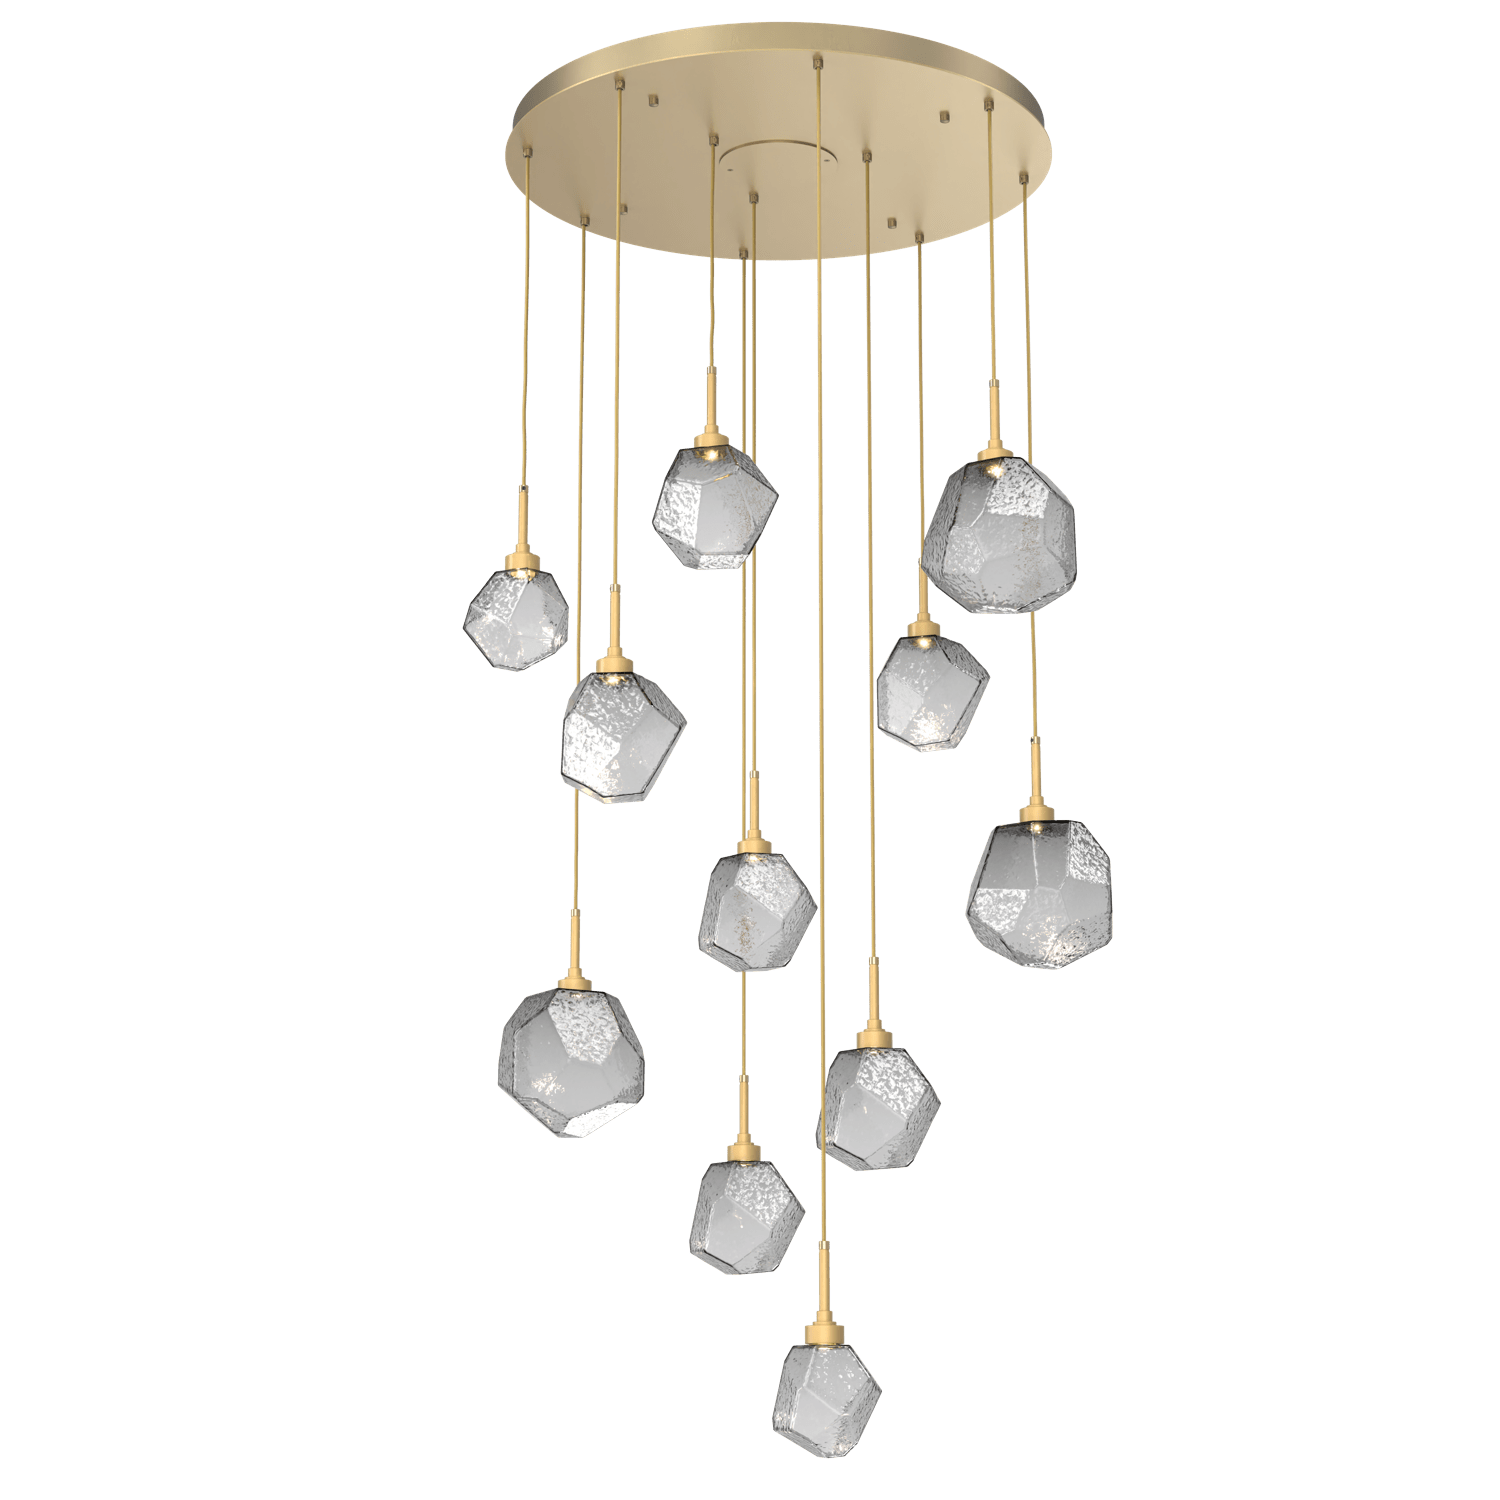 CHB0039-11-GB-S-Hammerton-Studio-Gem-11-light-round-pendant-chandelier-with-gilded-brass-finish-and-smoke-blown-glass-shades-and-LED-lamping